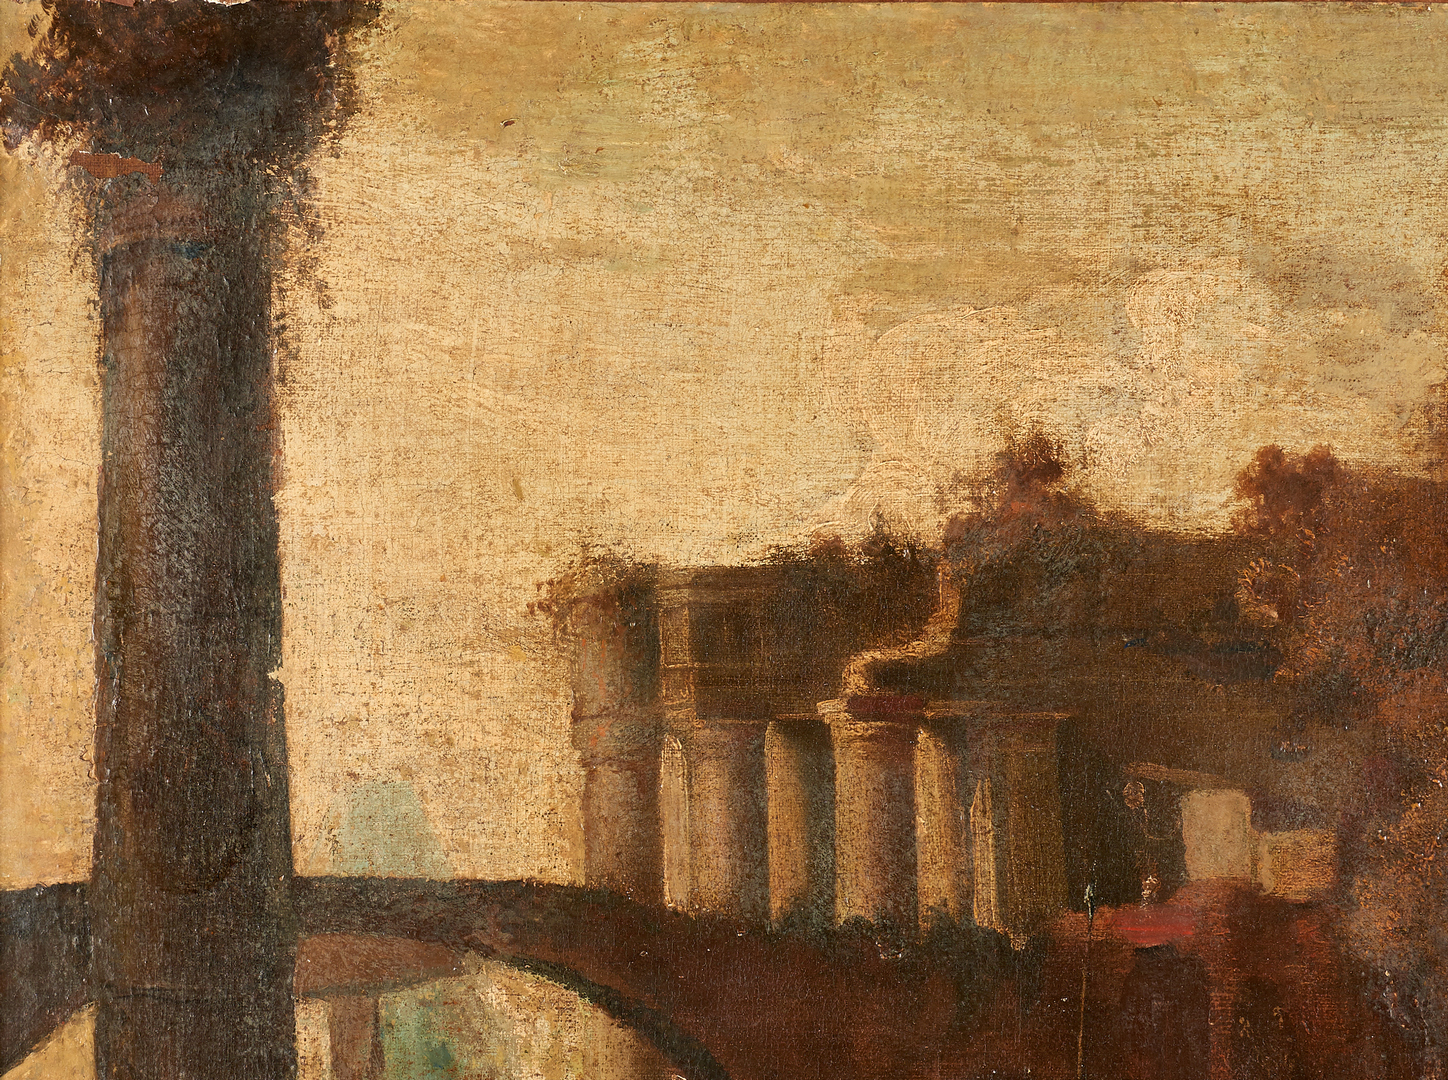 Lot 99: Style of Hubert Robert, 18th C. Landscape with Roman Ruins and 3 figures